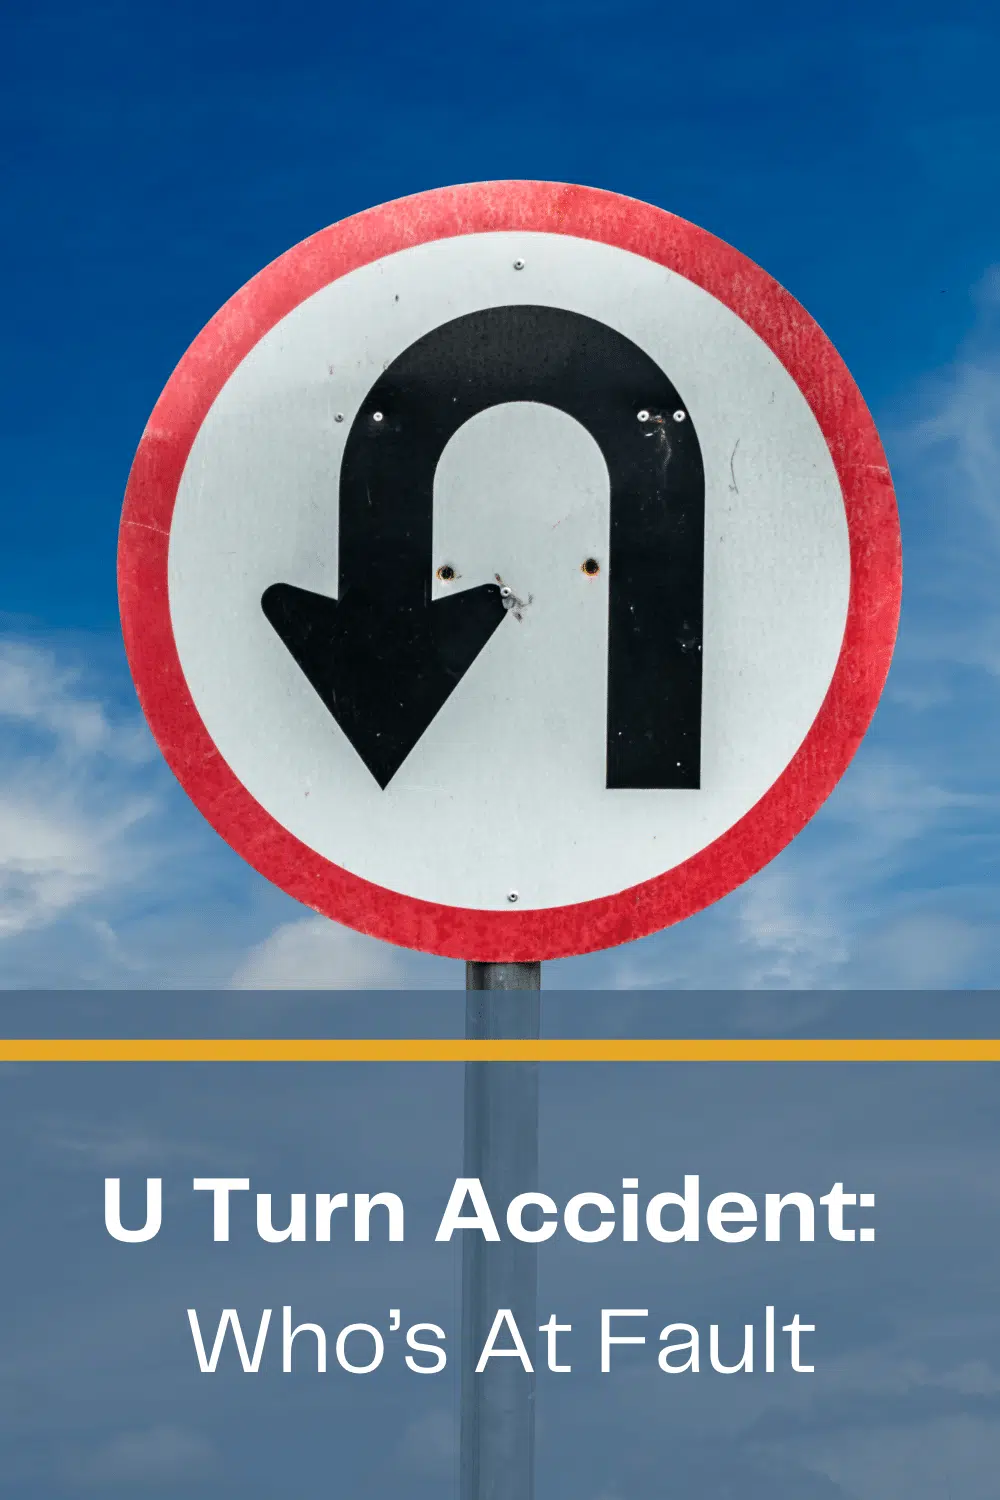 U Turn Accident: Who’s At Fault?